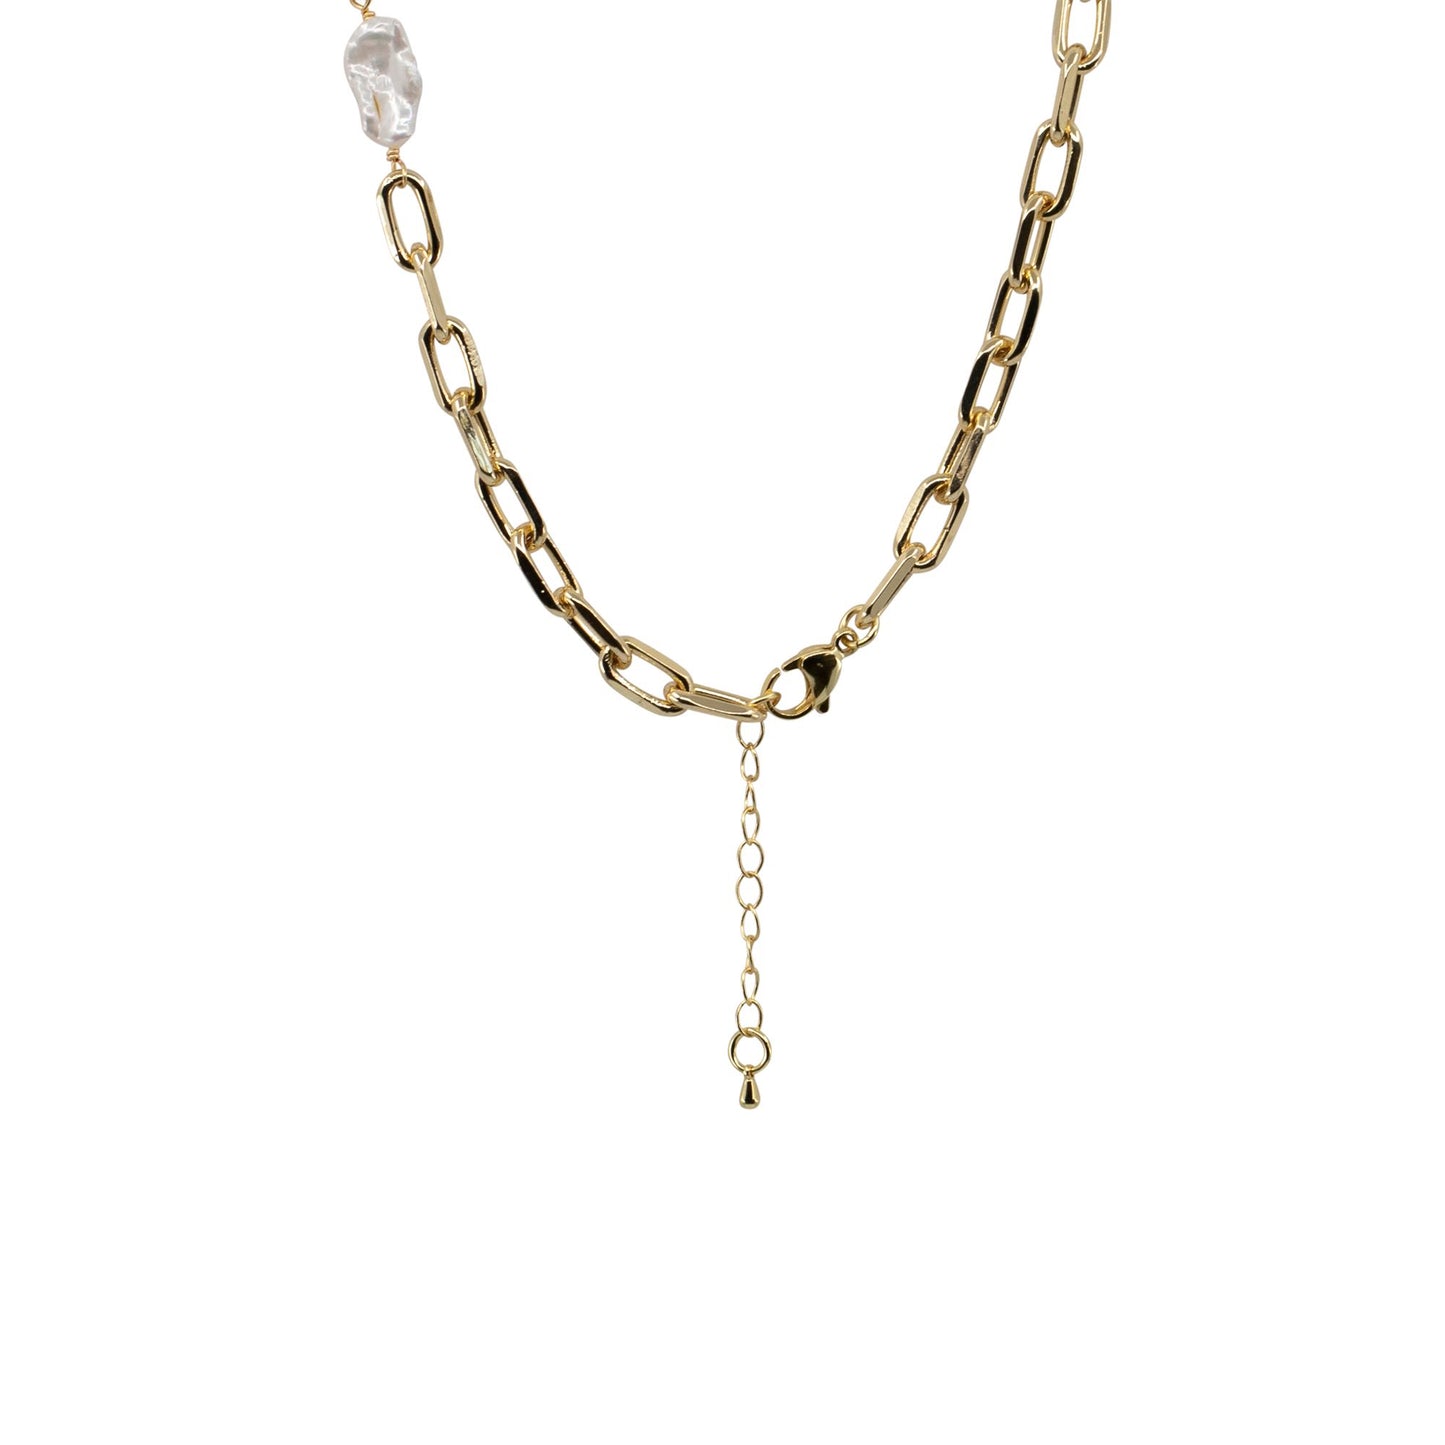 Chelsea - Long Gold-Tone Paperclip Freshwater Pearl Baroque Necklace